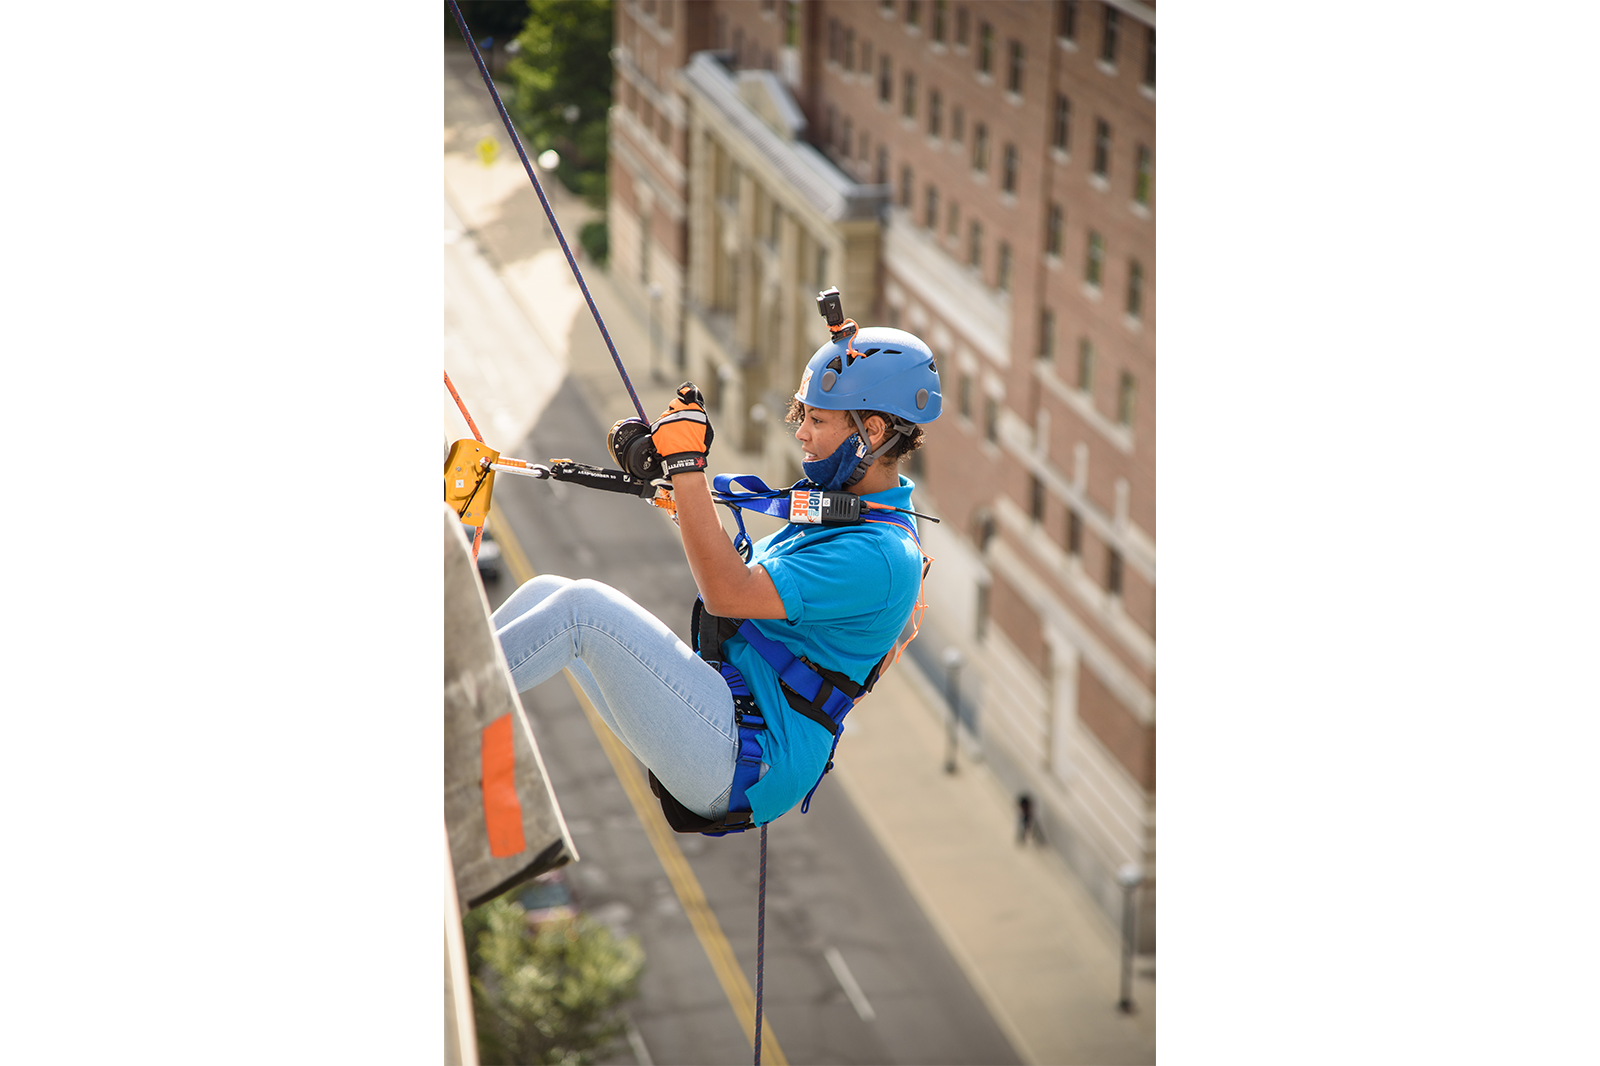 A participant at last year's Over the Edge event rappels down the Graduate Hotel.